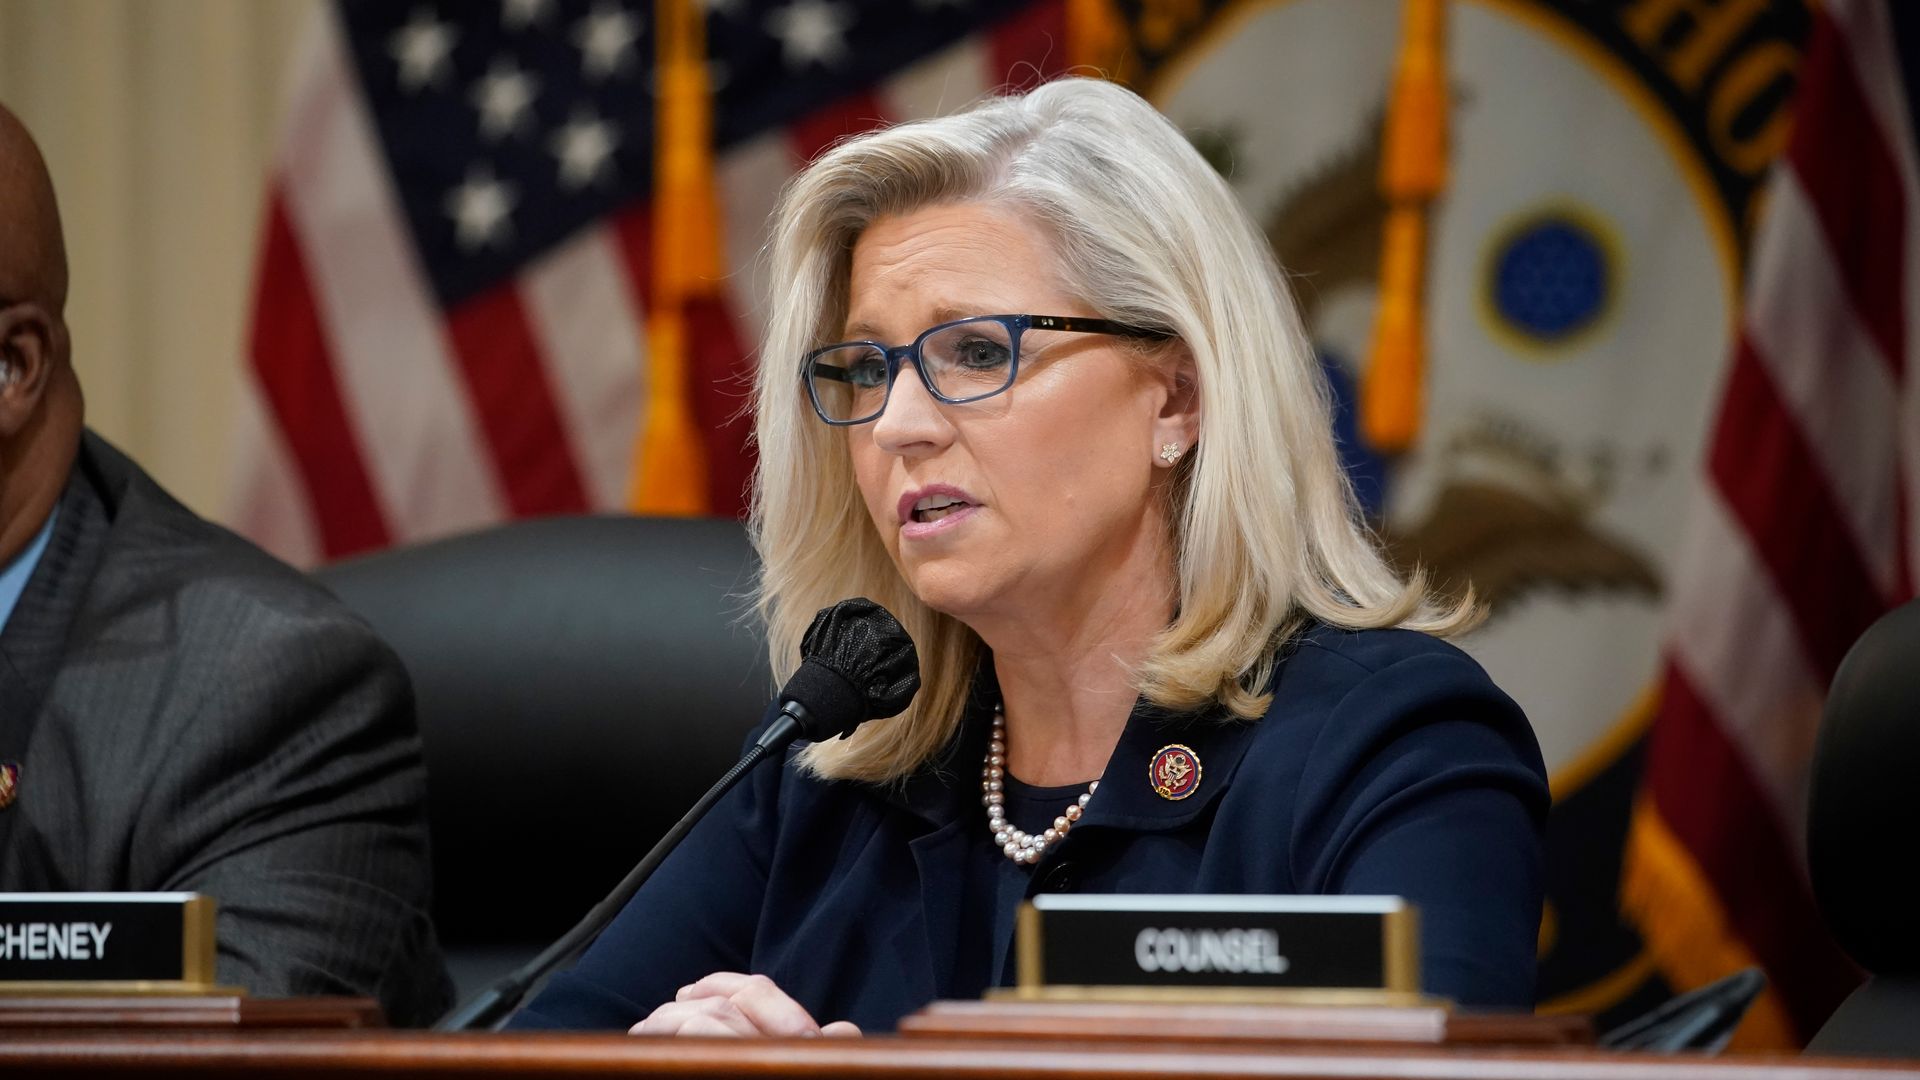 Representative Liz Cheney, a Republican from Wyoming, speaks during a hearing of the Select Committee to Investigate the January 6th Attack on the US Capitol.